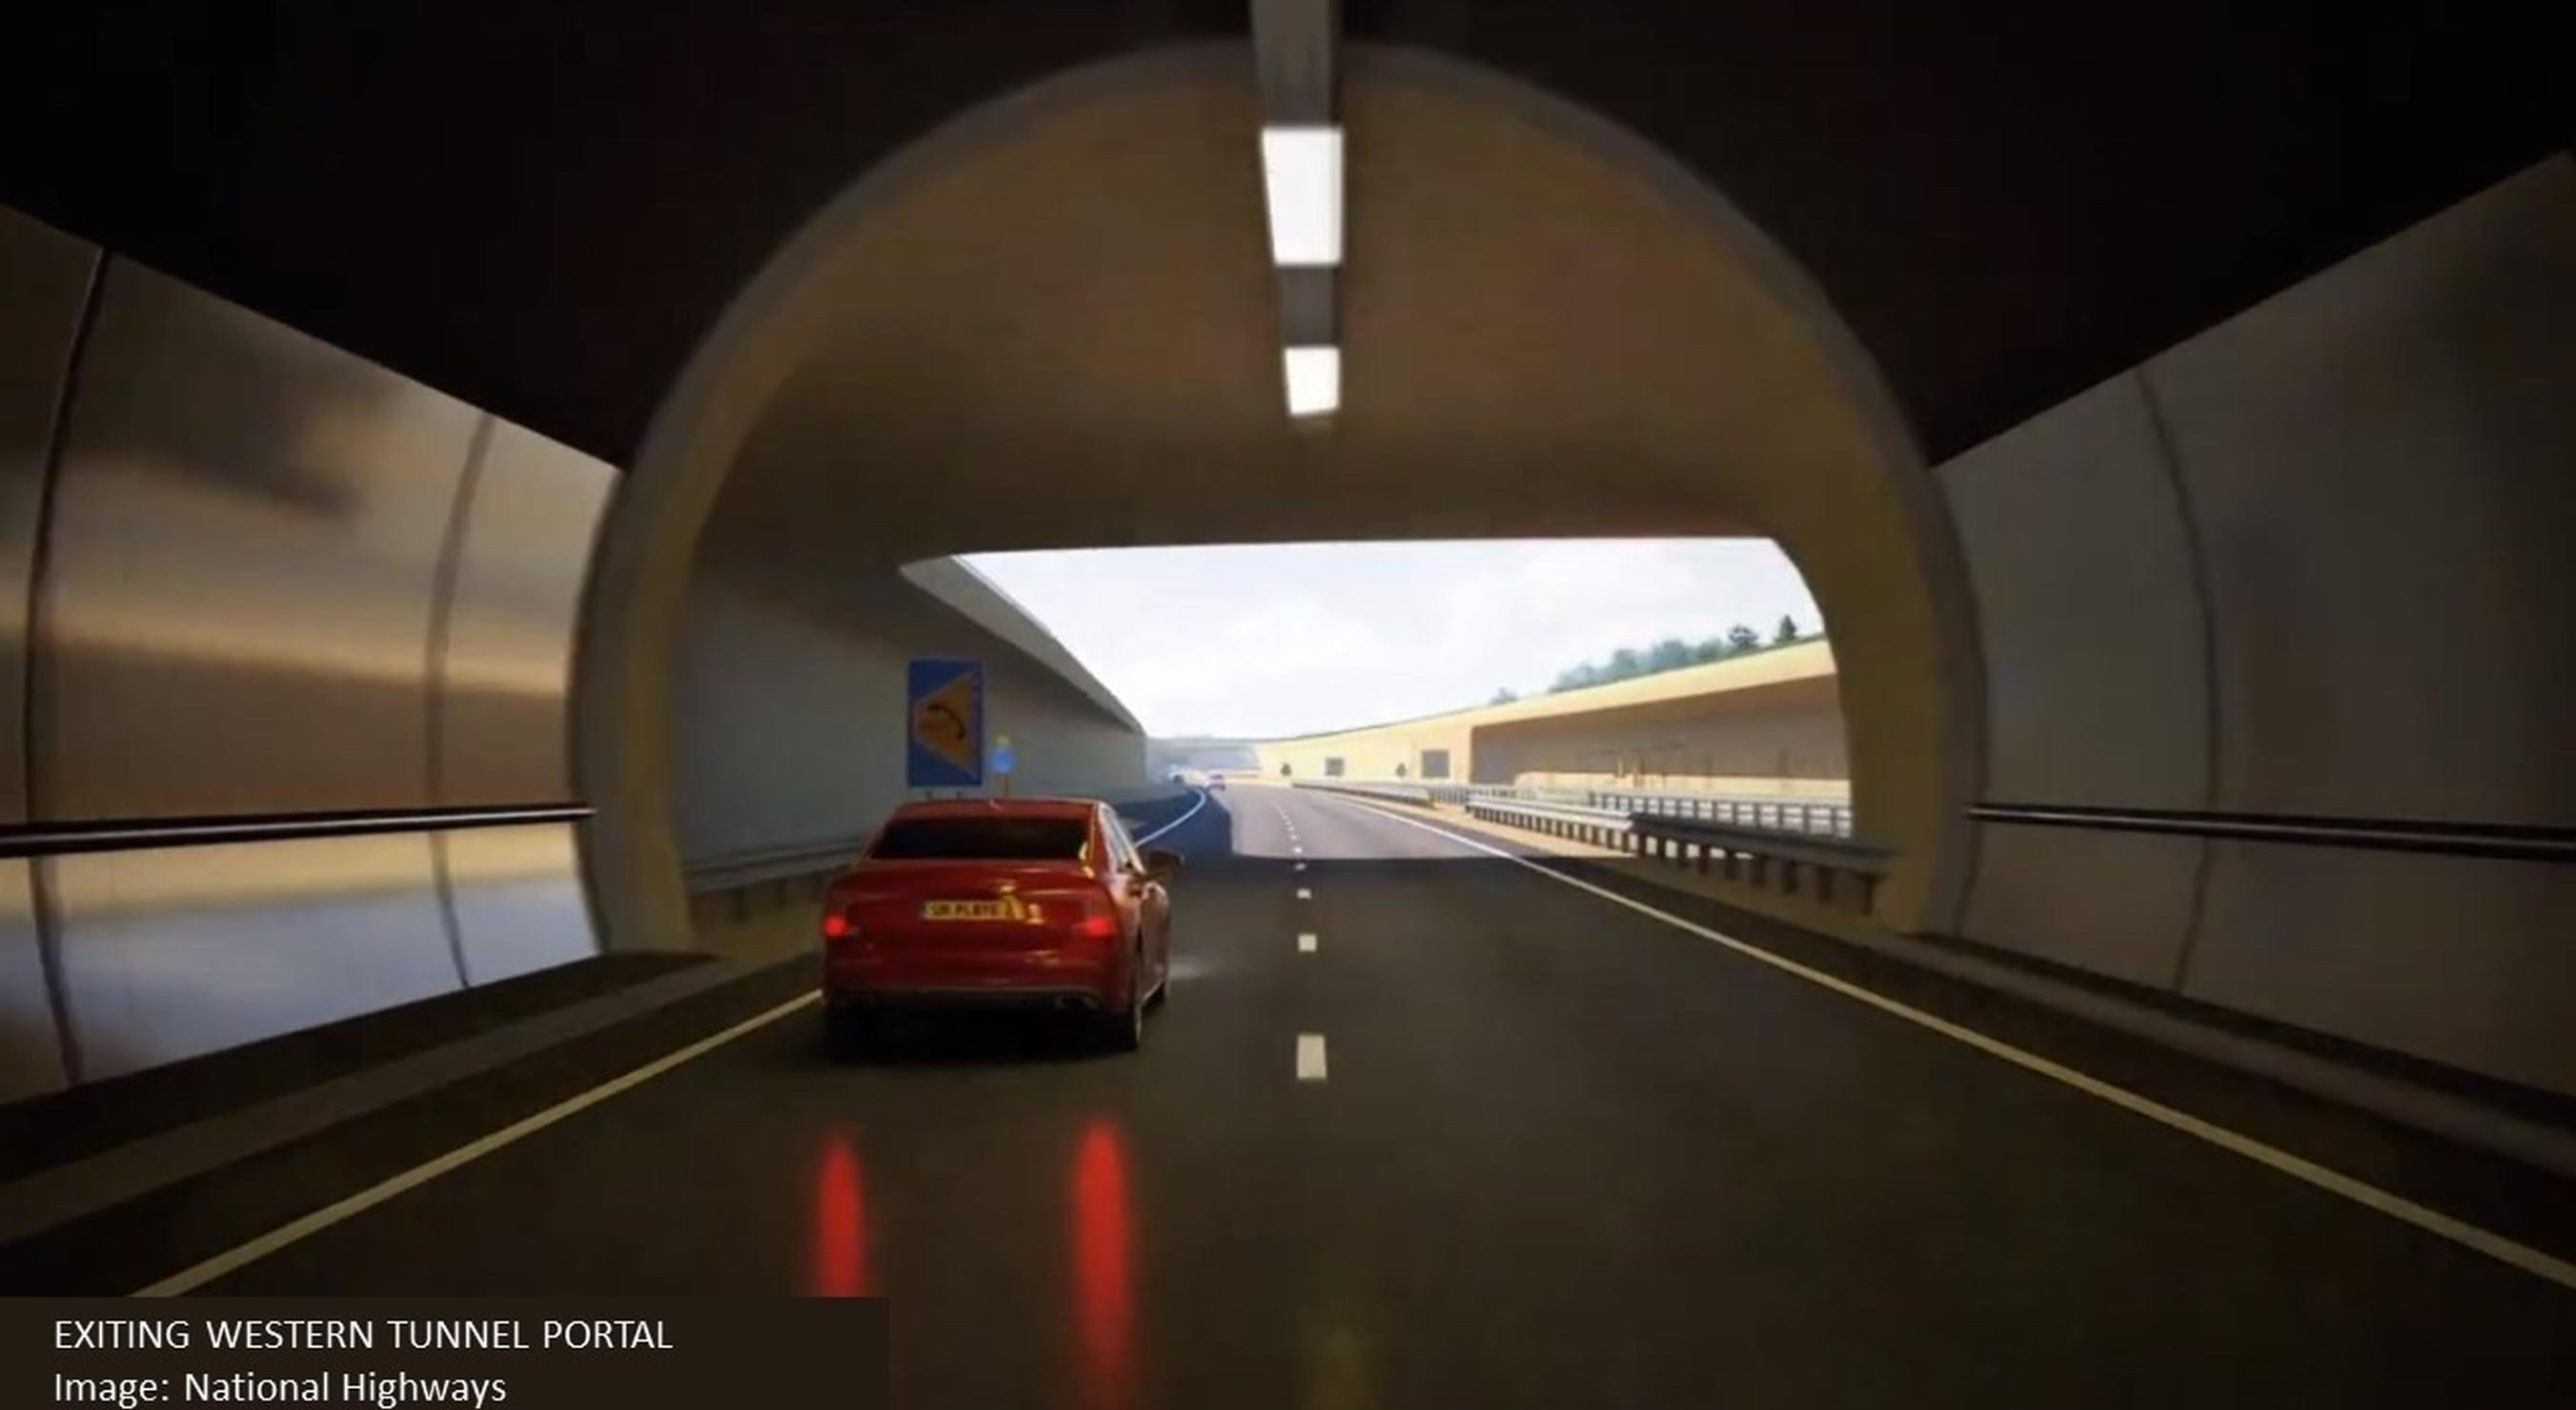 Visualisation of exiting the western portal of the proposed Stonehenge tunnel. PIC: National Highways